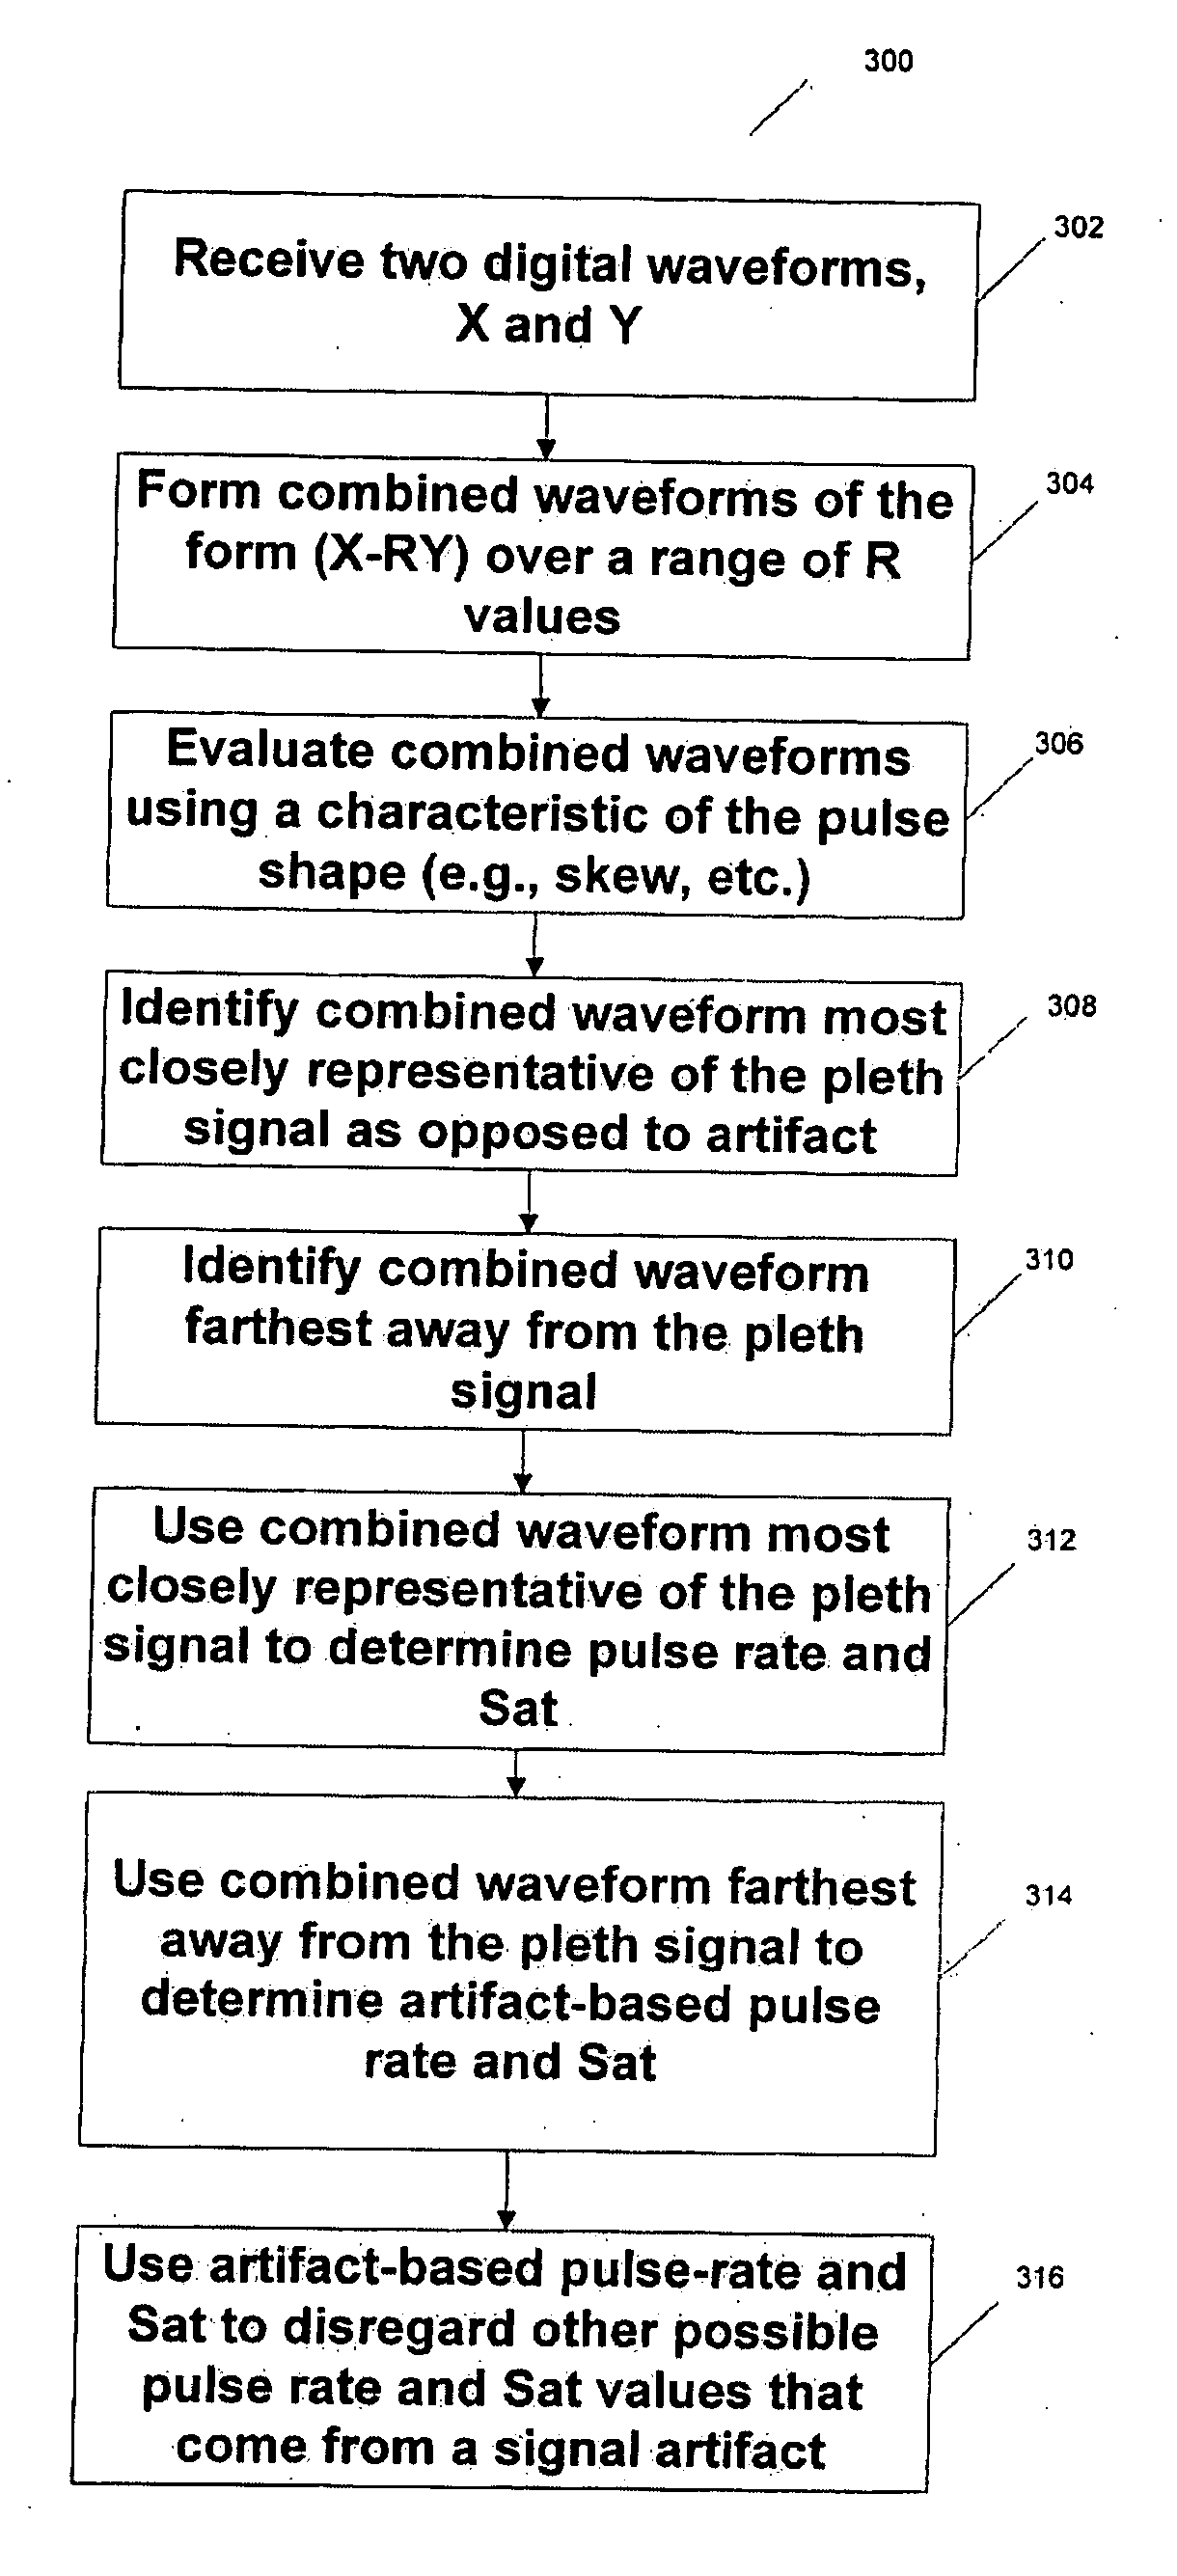 Method for enhancing pulse oximetry calculations in the presence of correlated artifacts